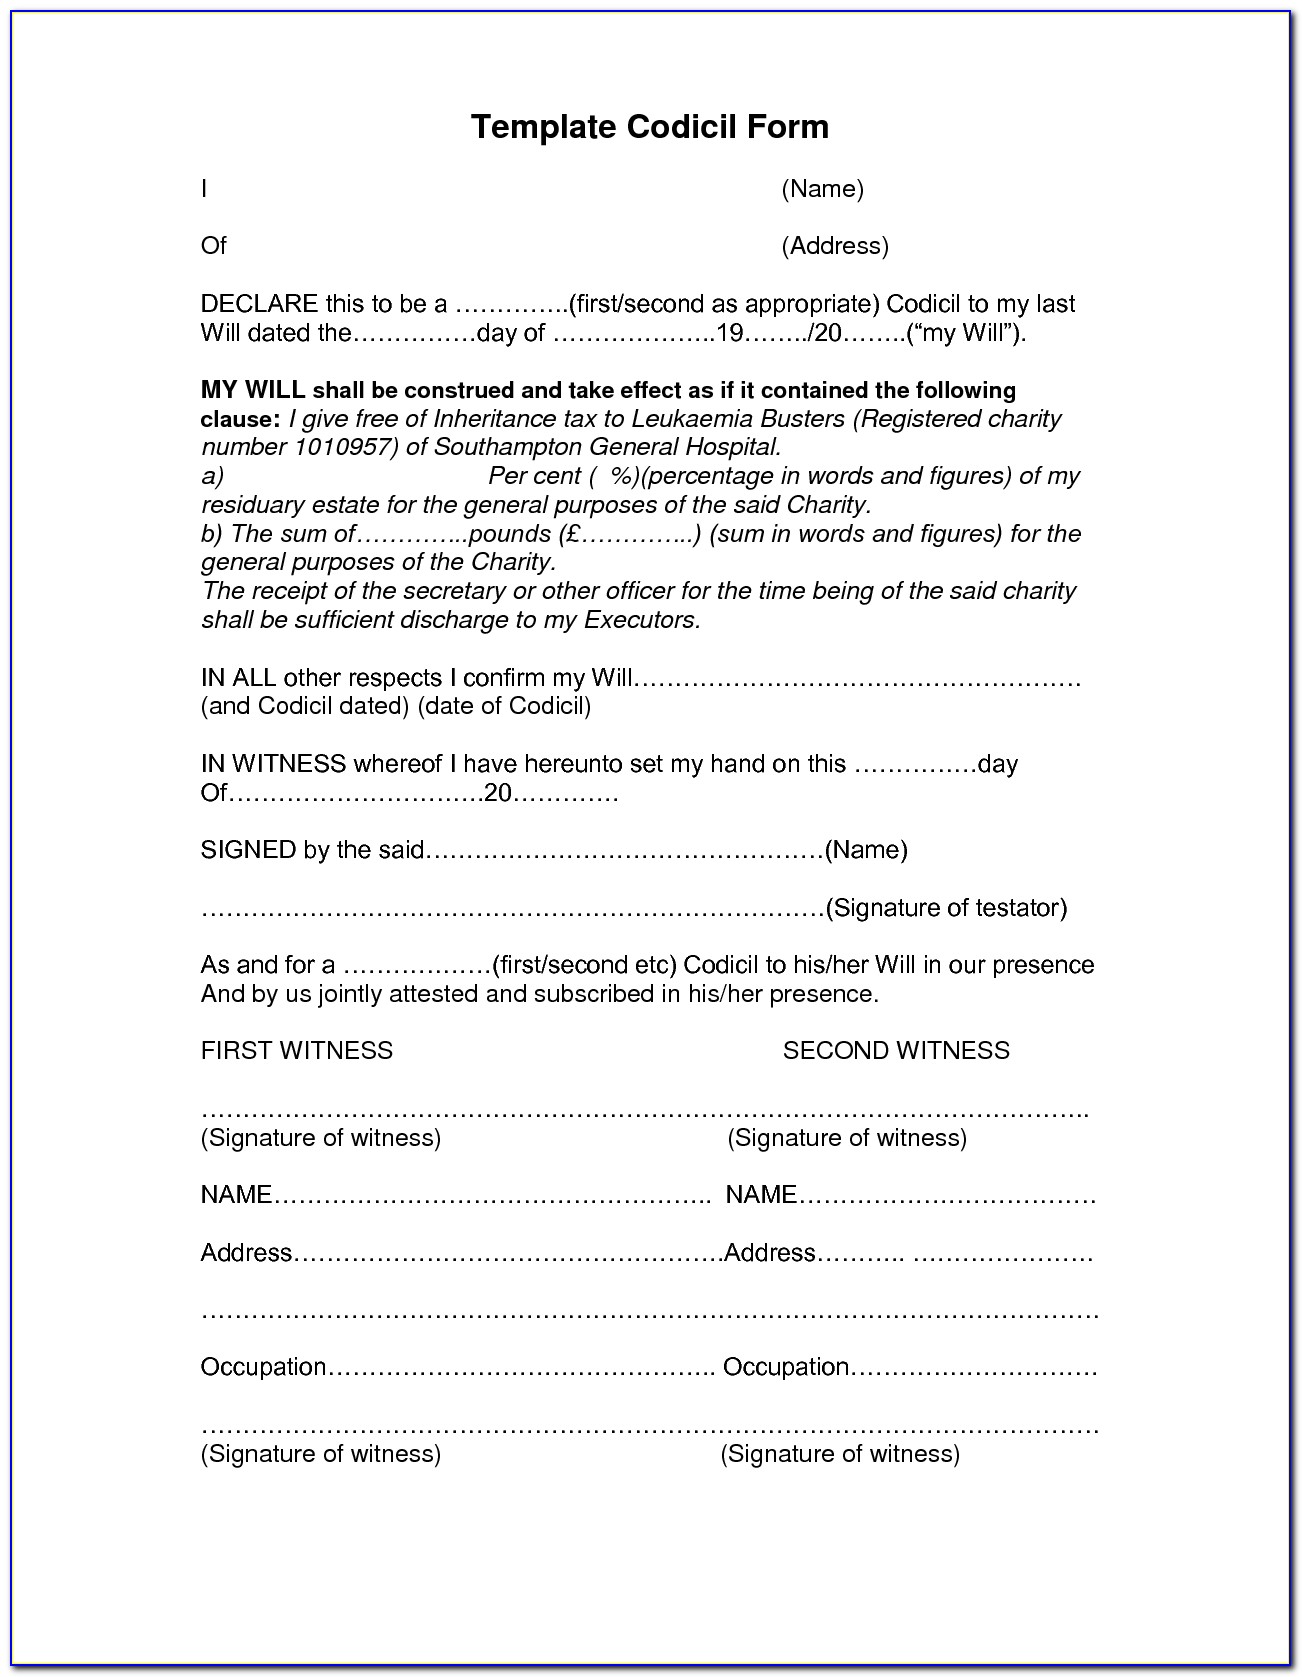 free-codicil-form-uk-form-resume-examples-enk6wpgdbv